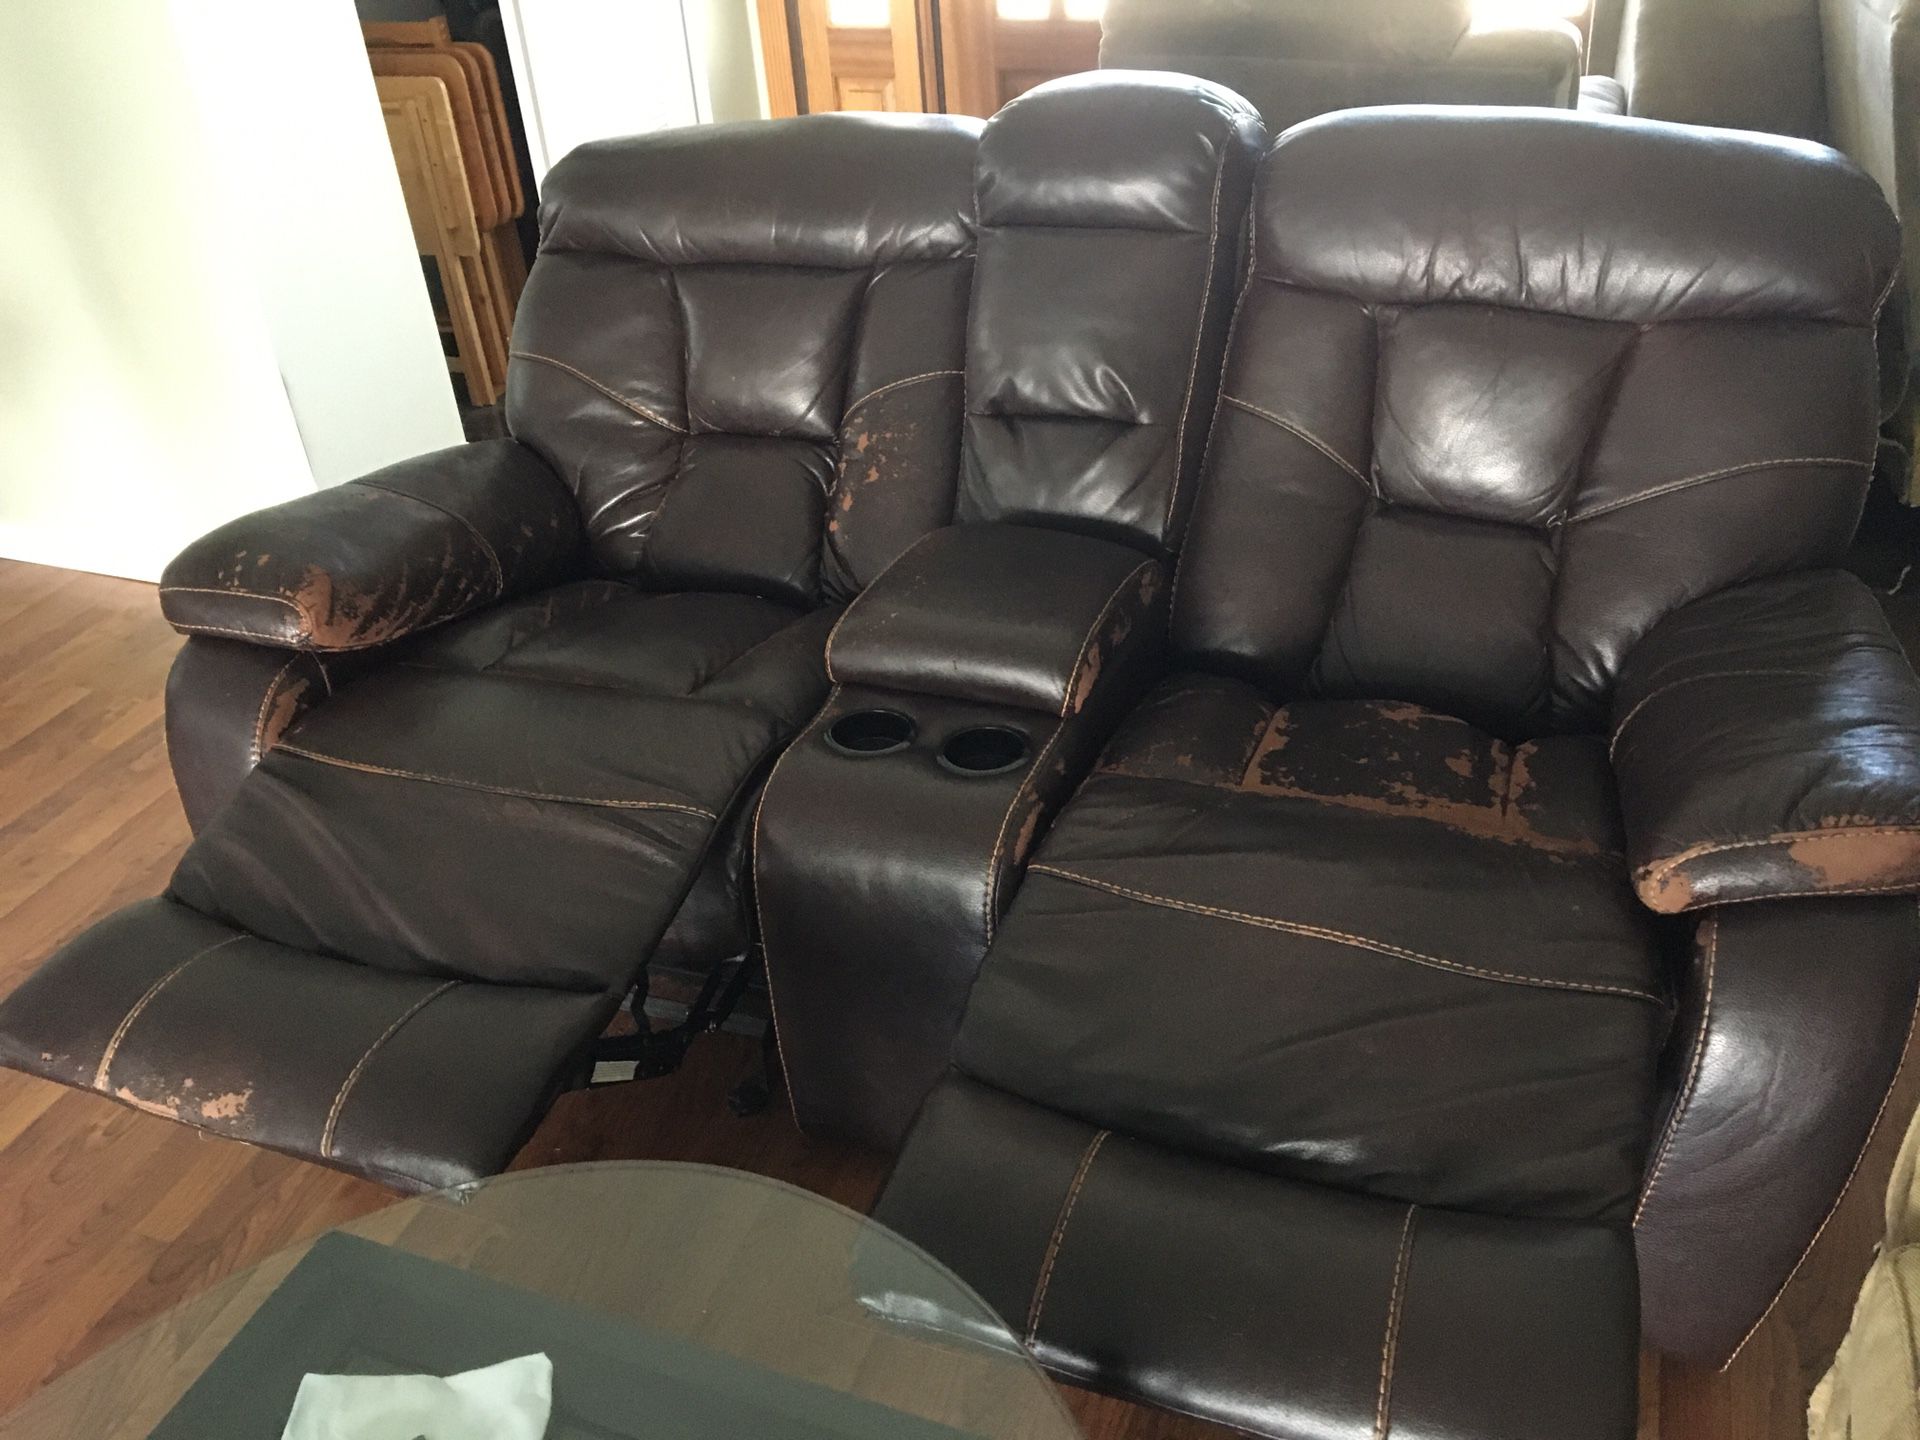 Free double gaming recliner armchair loveseat